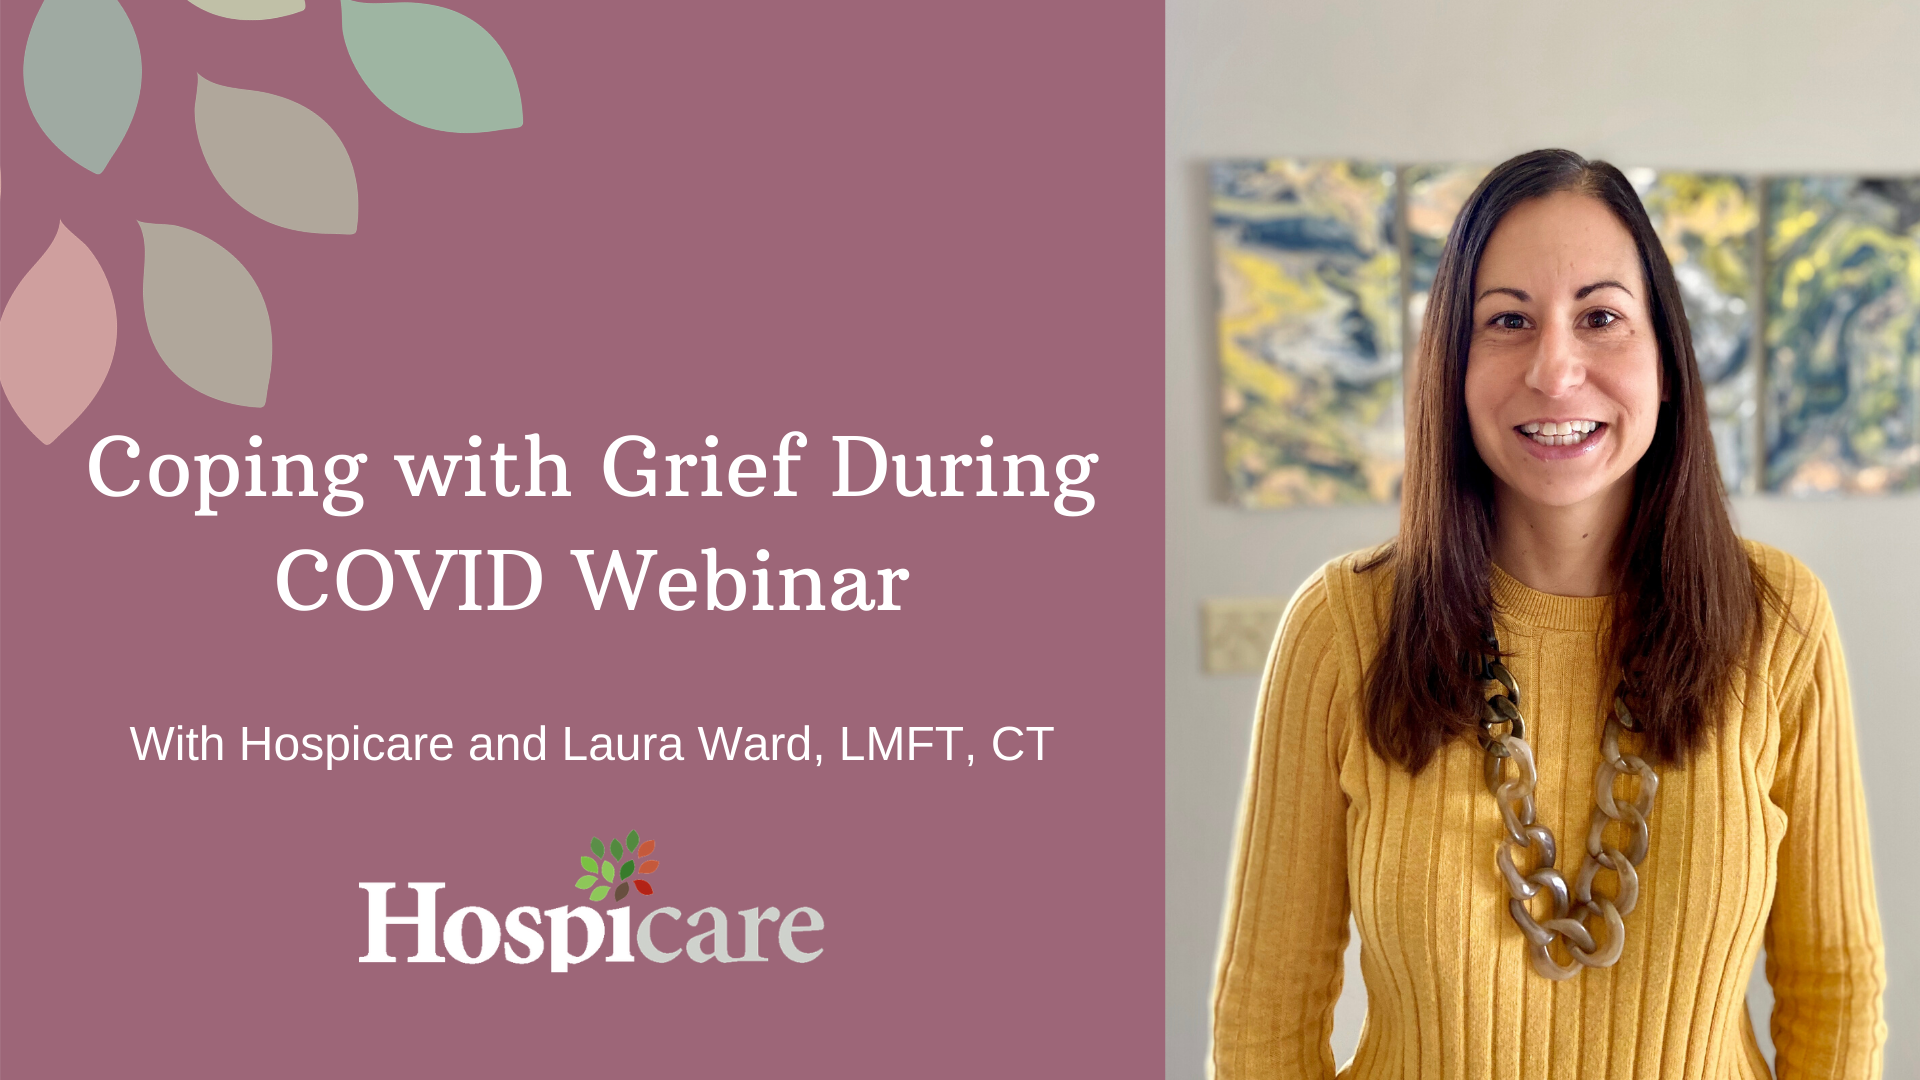 Coping with Grief During Covid Webinar